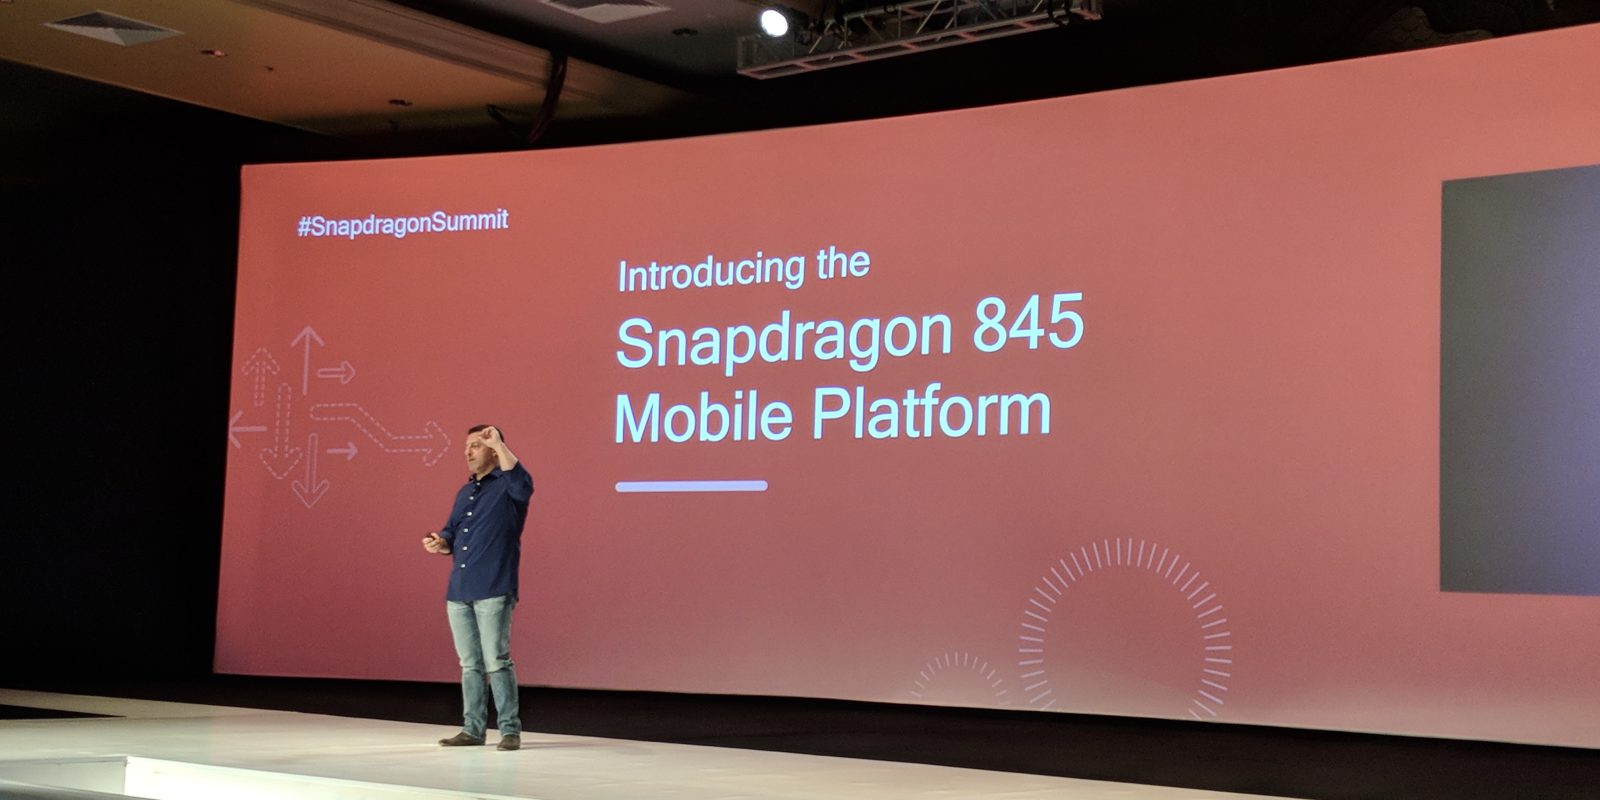 qualcomm snapdragon 845 cover